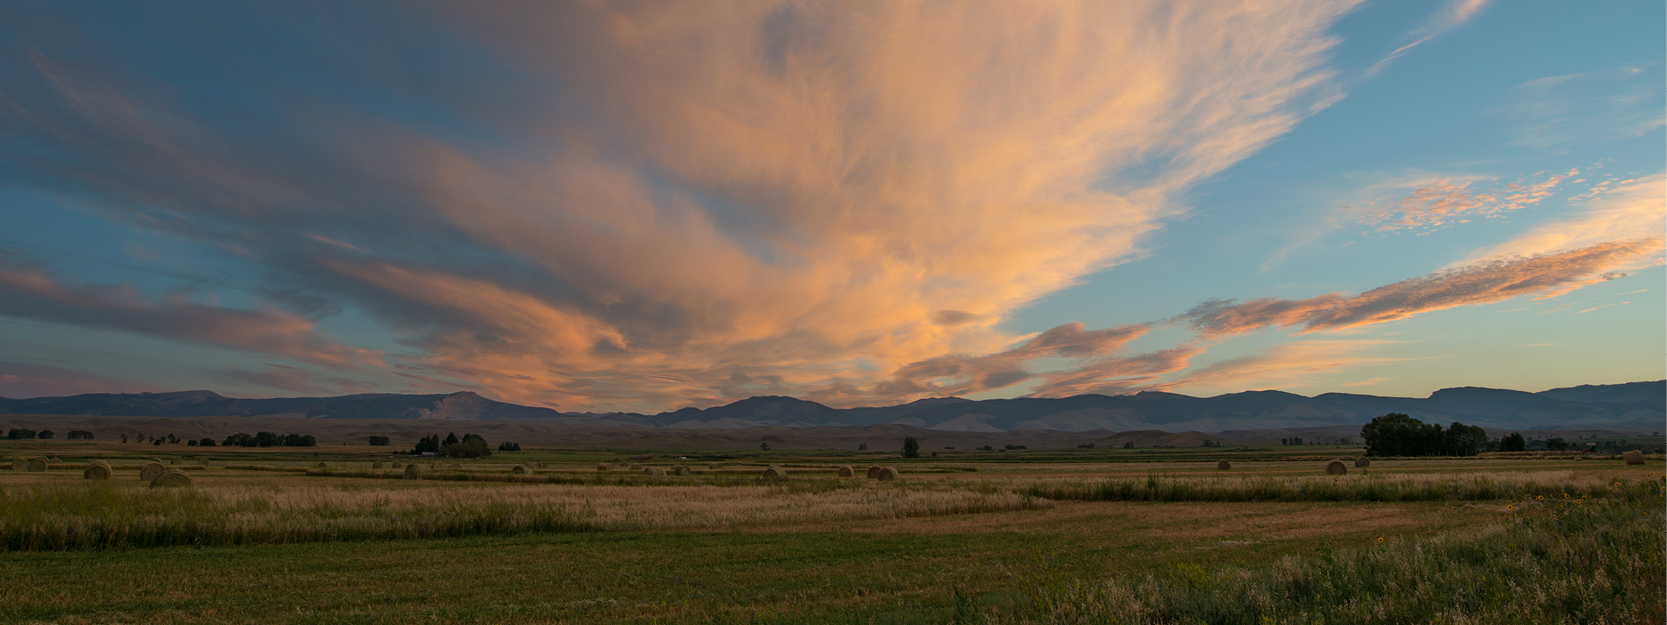 Help shape the future of public lands in Wyoming